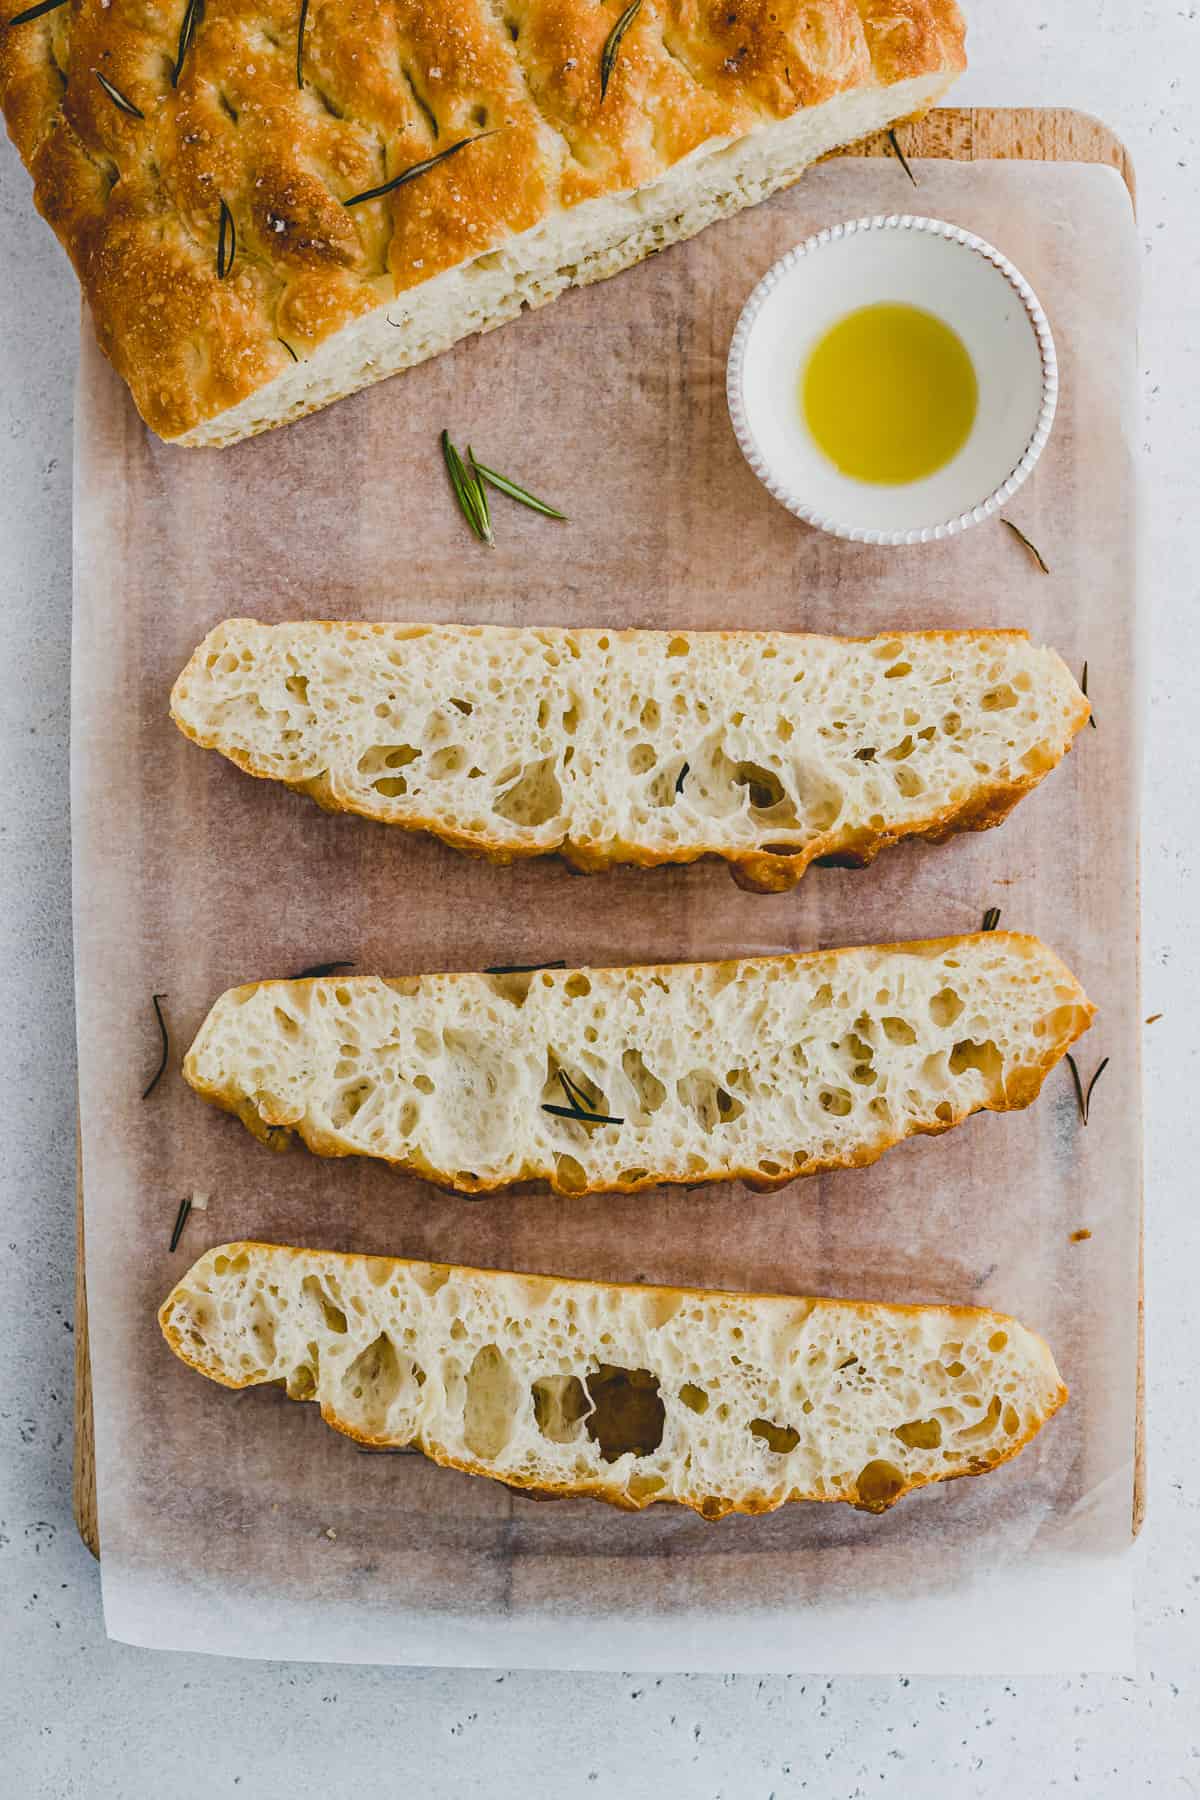 Top view of rosemary focaccia bread slices on a chopping board with a small bowl of olive oil on the side.  